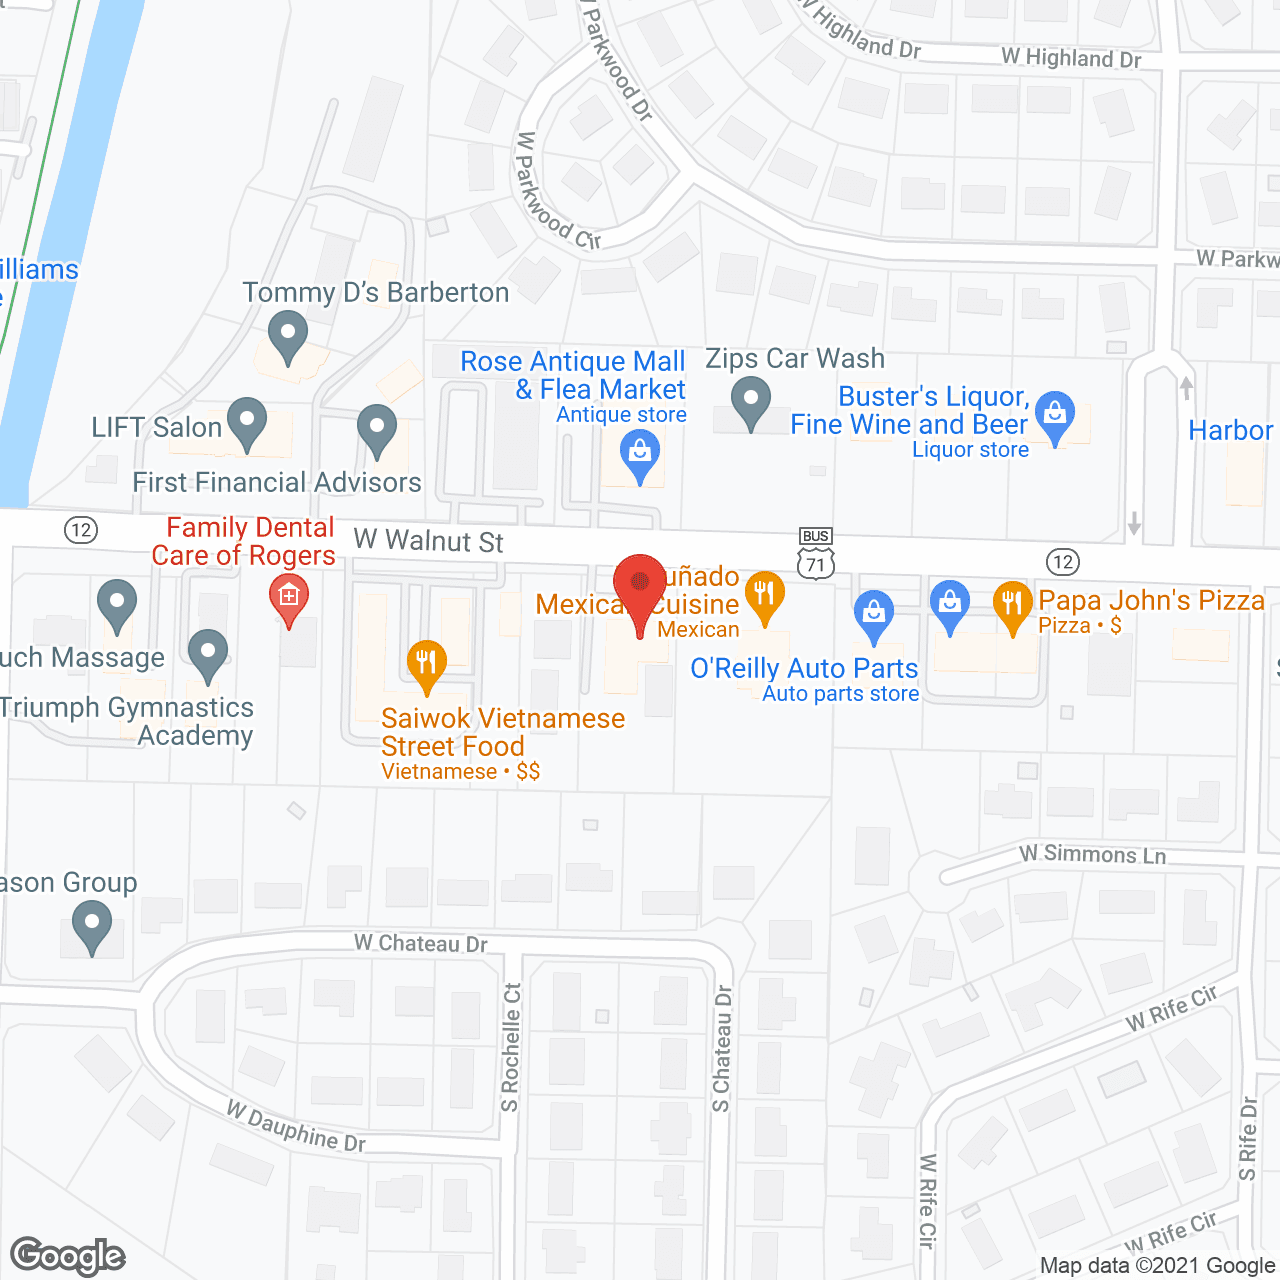 Care Network in google map